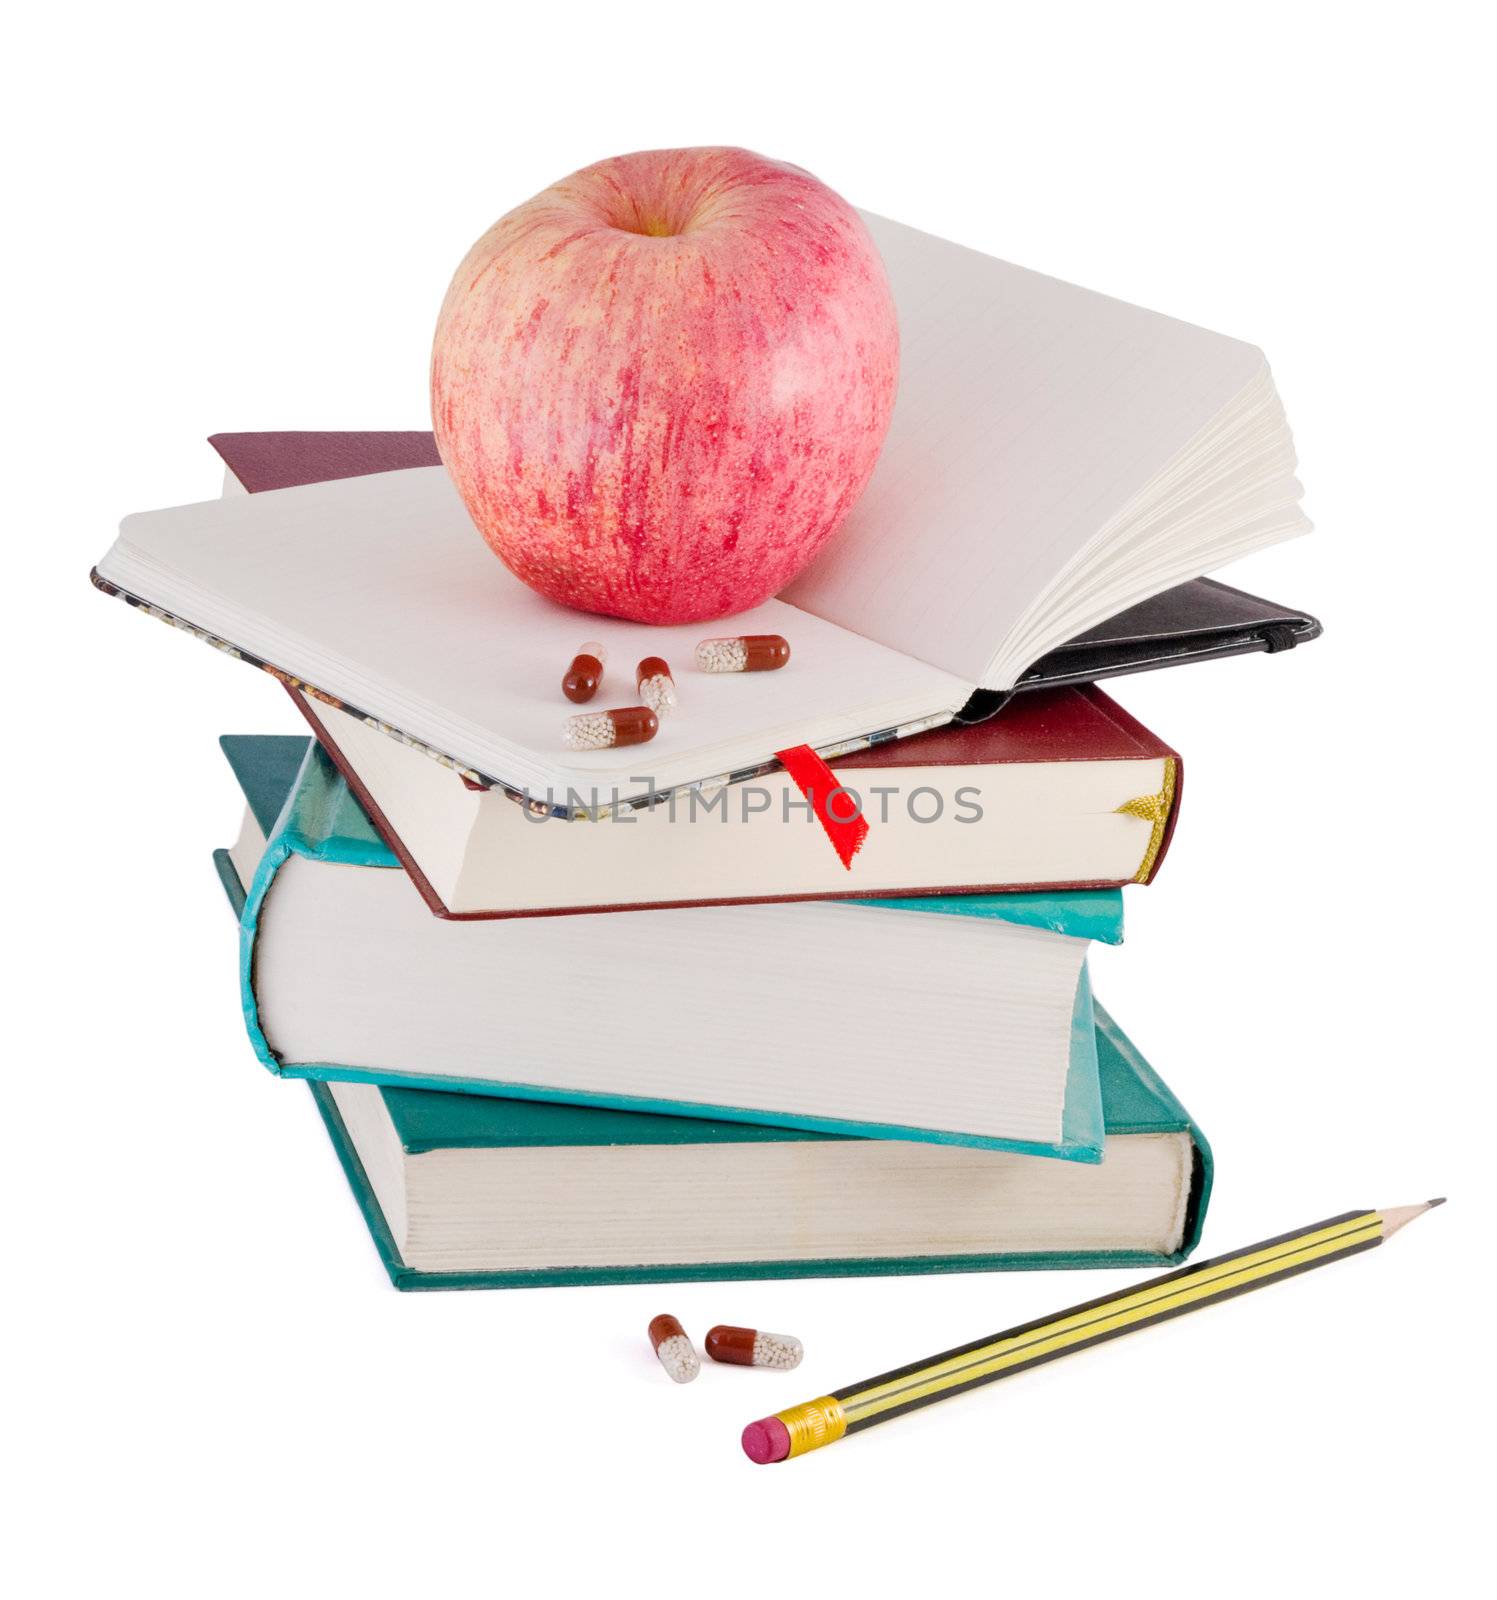 Pills and red apple on textbook pile as metaphor of efective learning